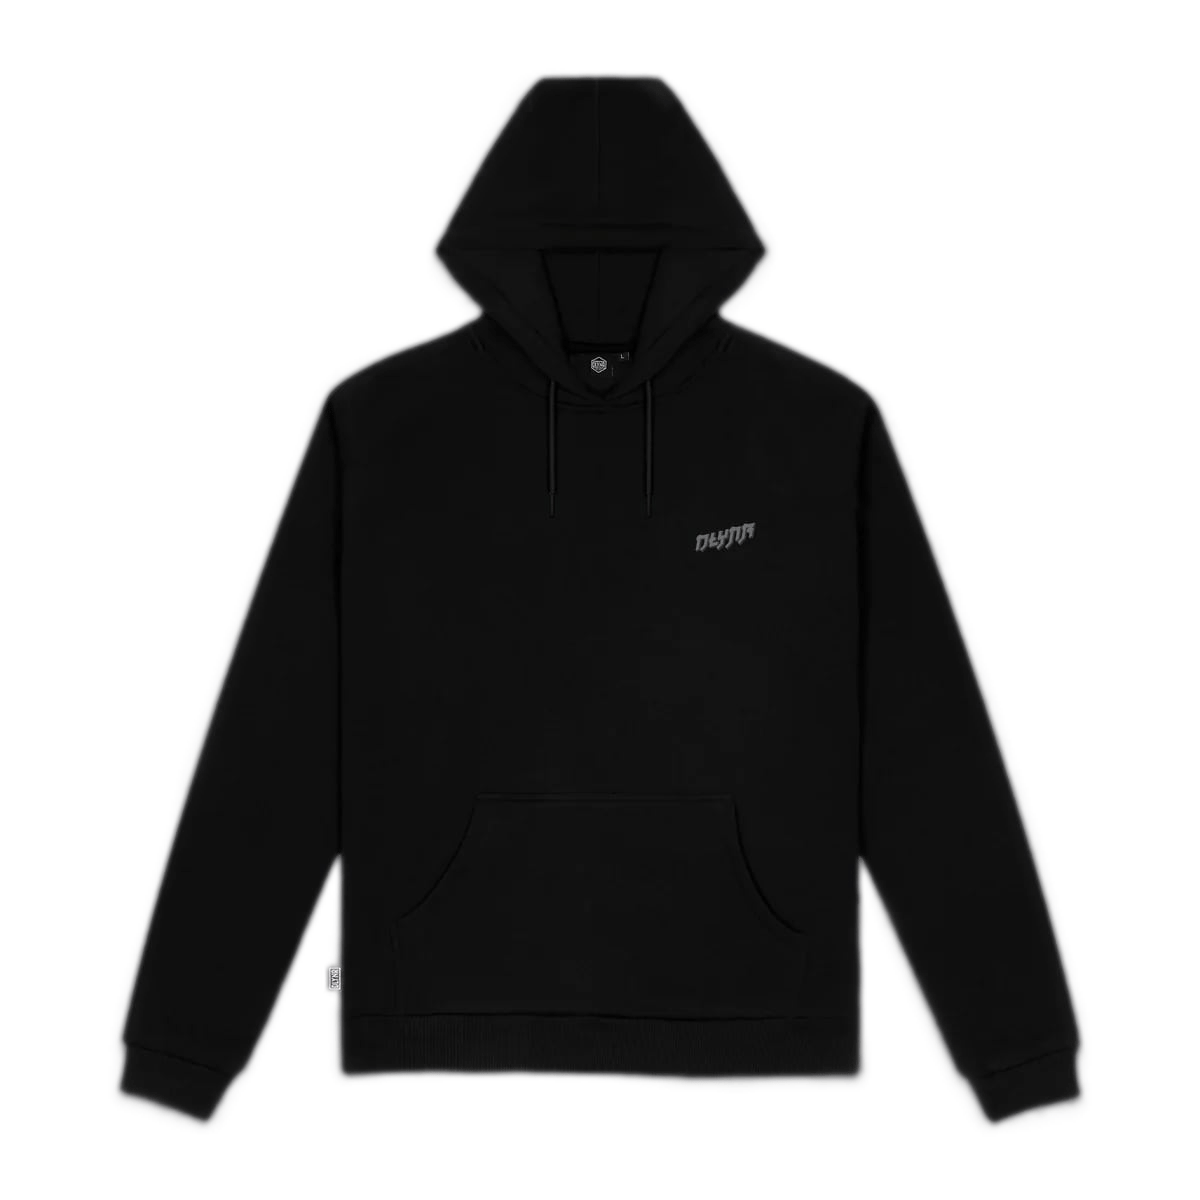 Dolly noire goat racing hoodie SW511-GQ-01